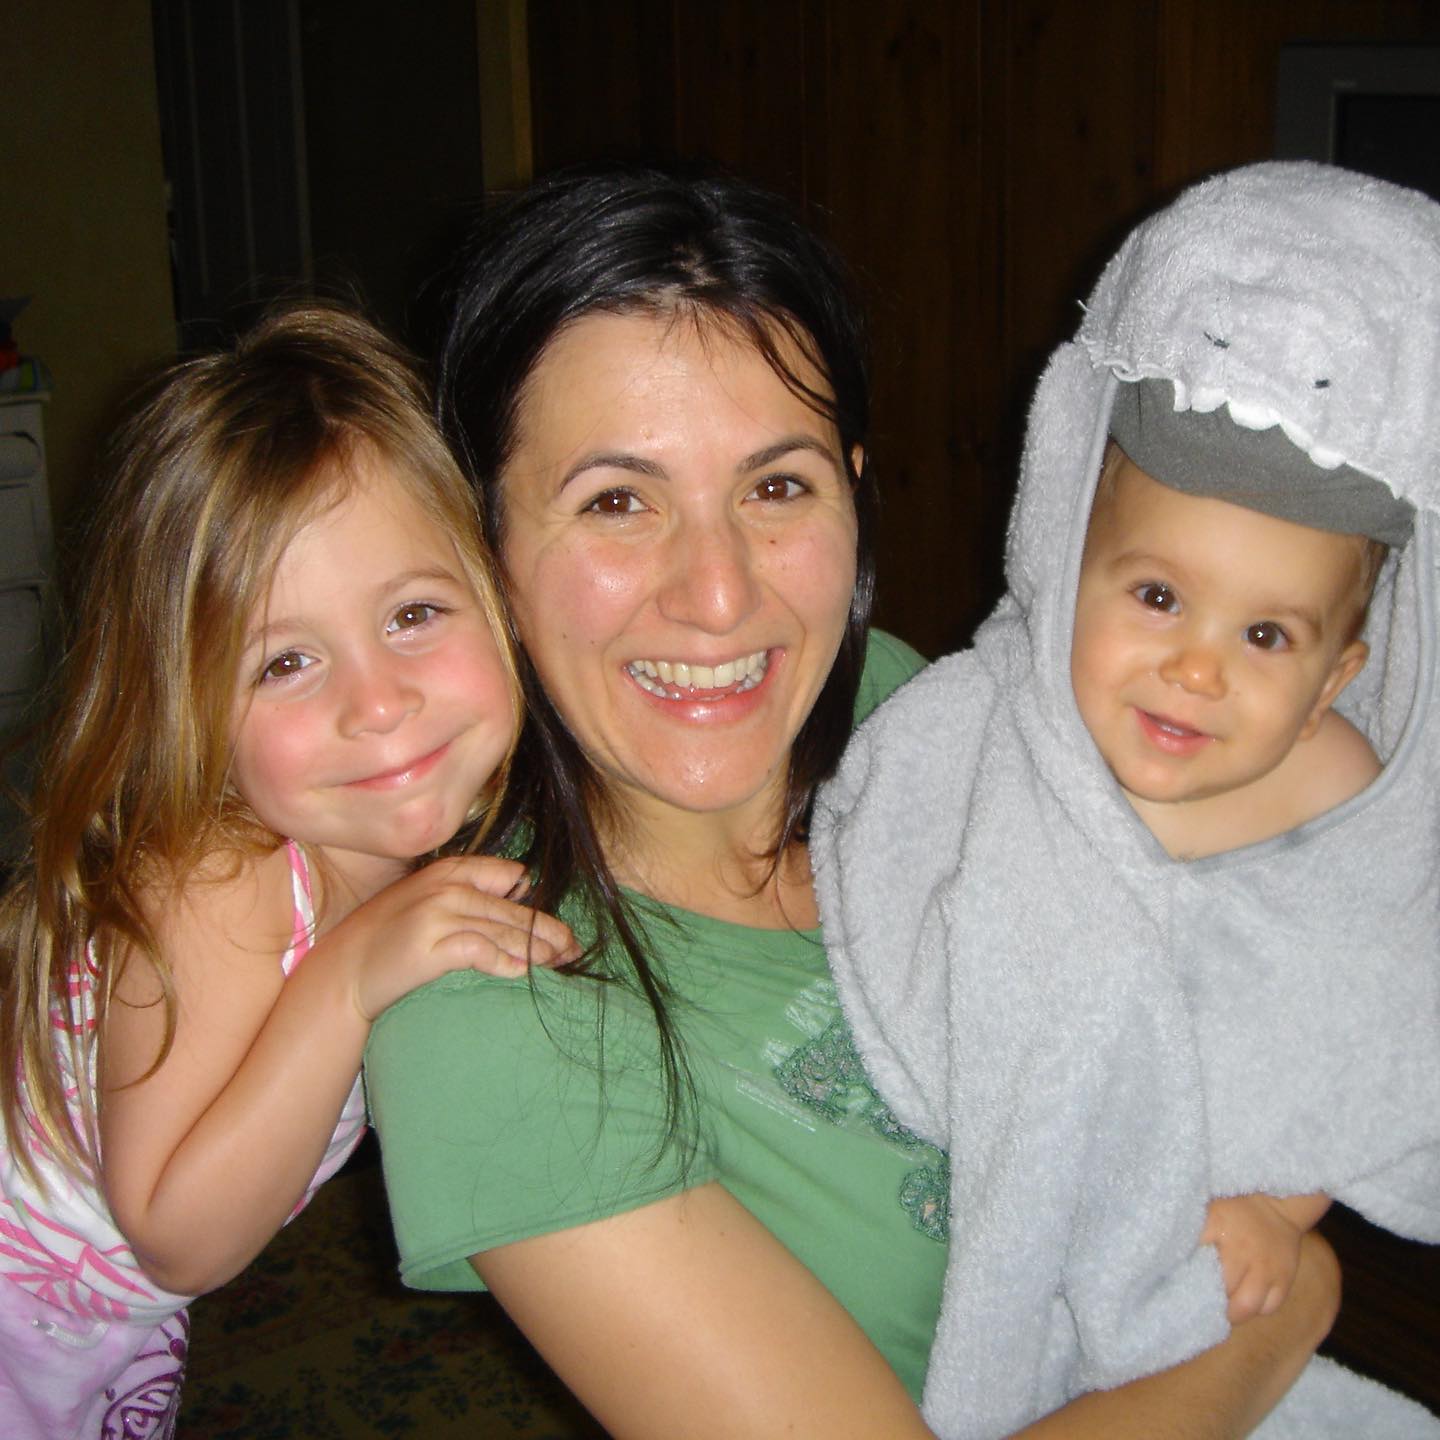 A throwback picture of Tom Everett Scott's wife, Jenni Gallagher, with their children